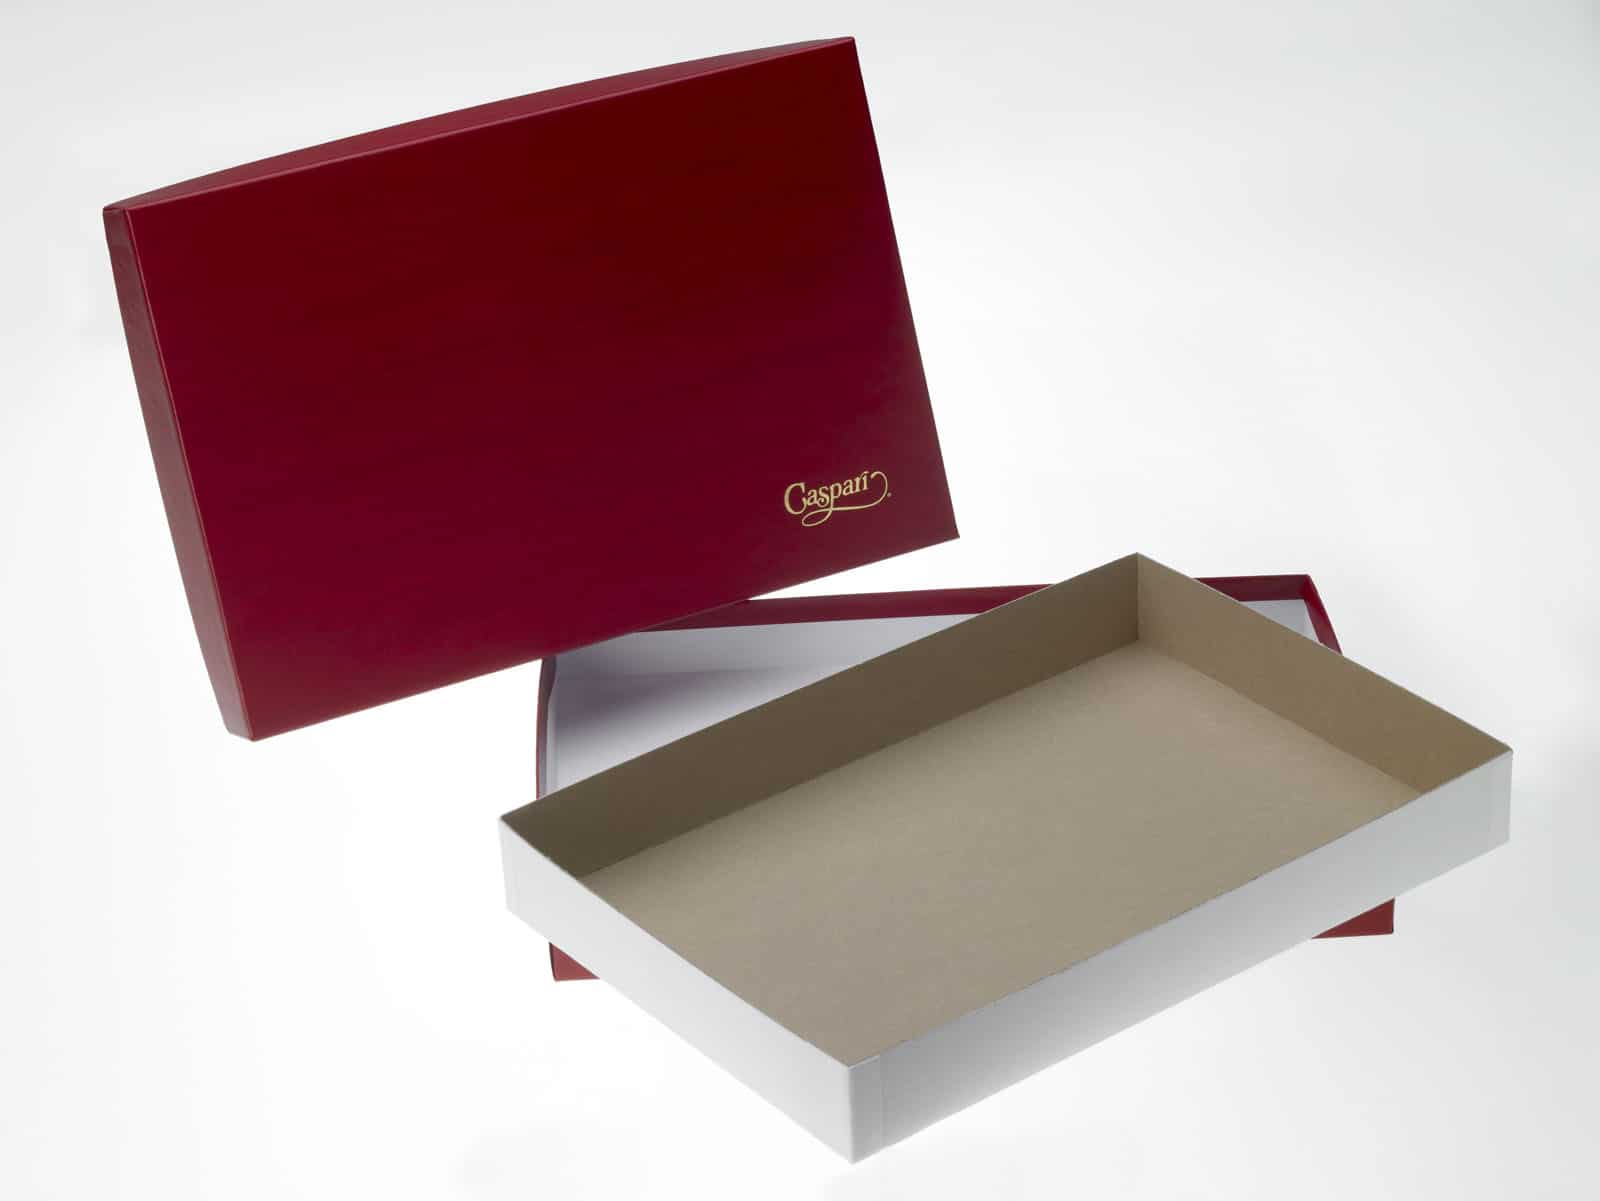 caspari holiday box, base and lid style box with red cover material and gold foil stamping